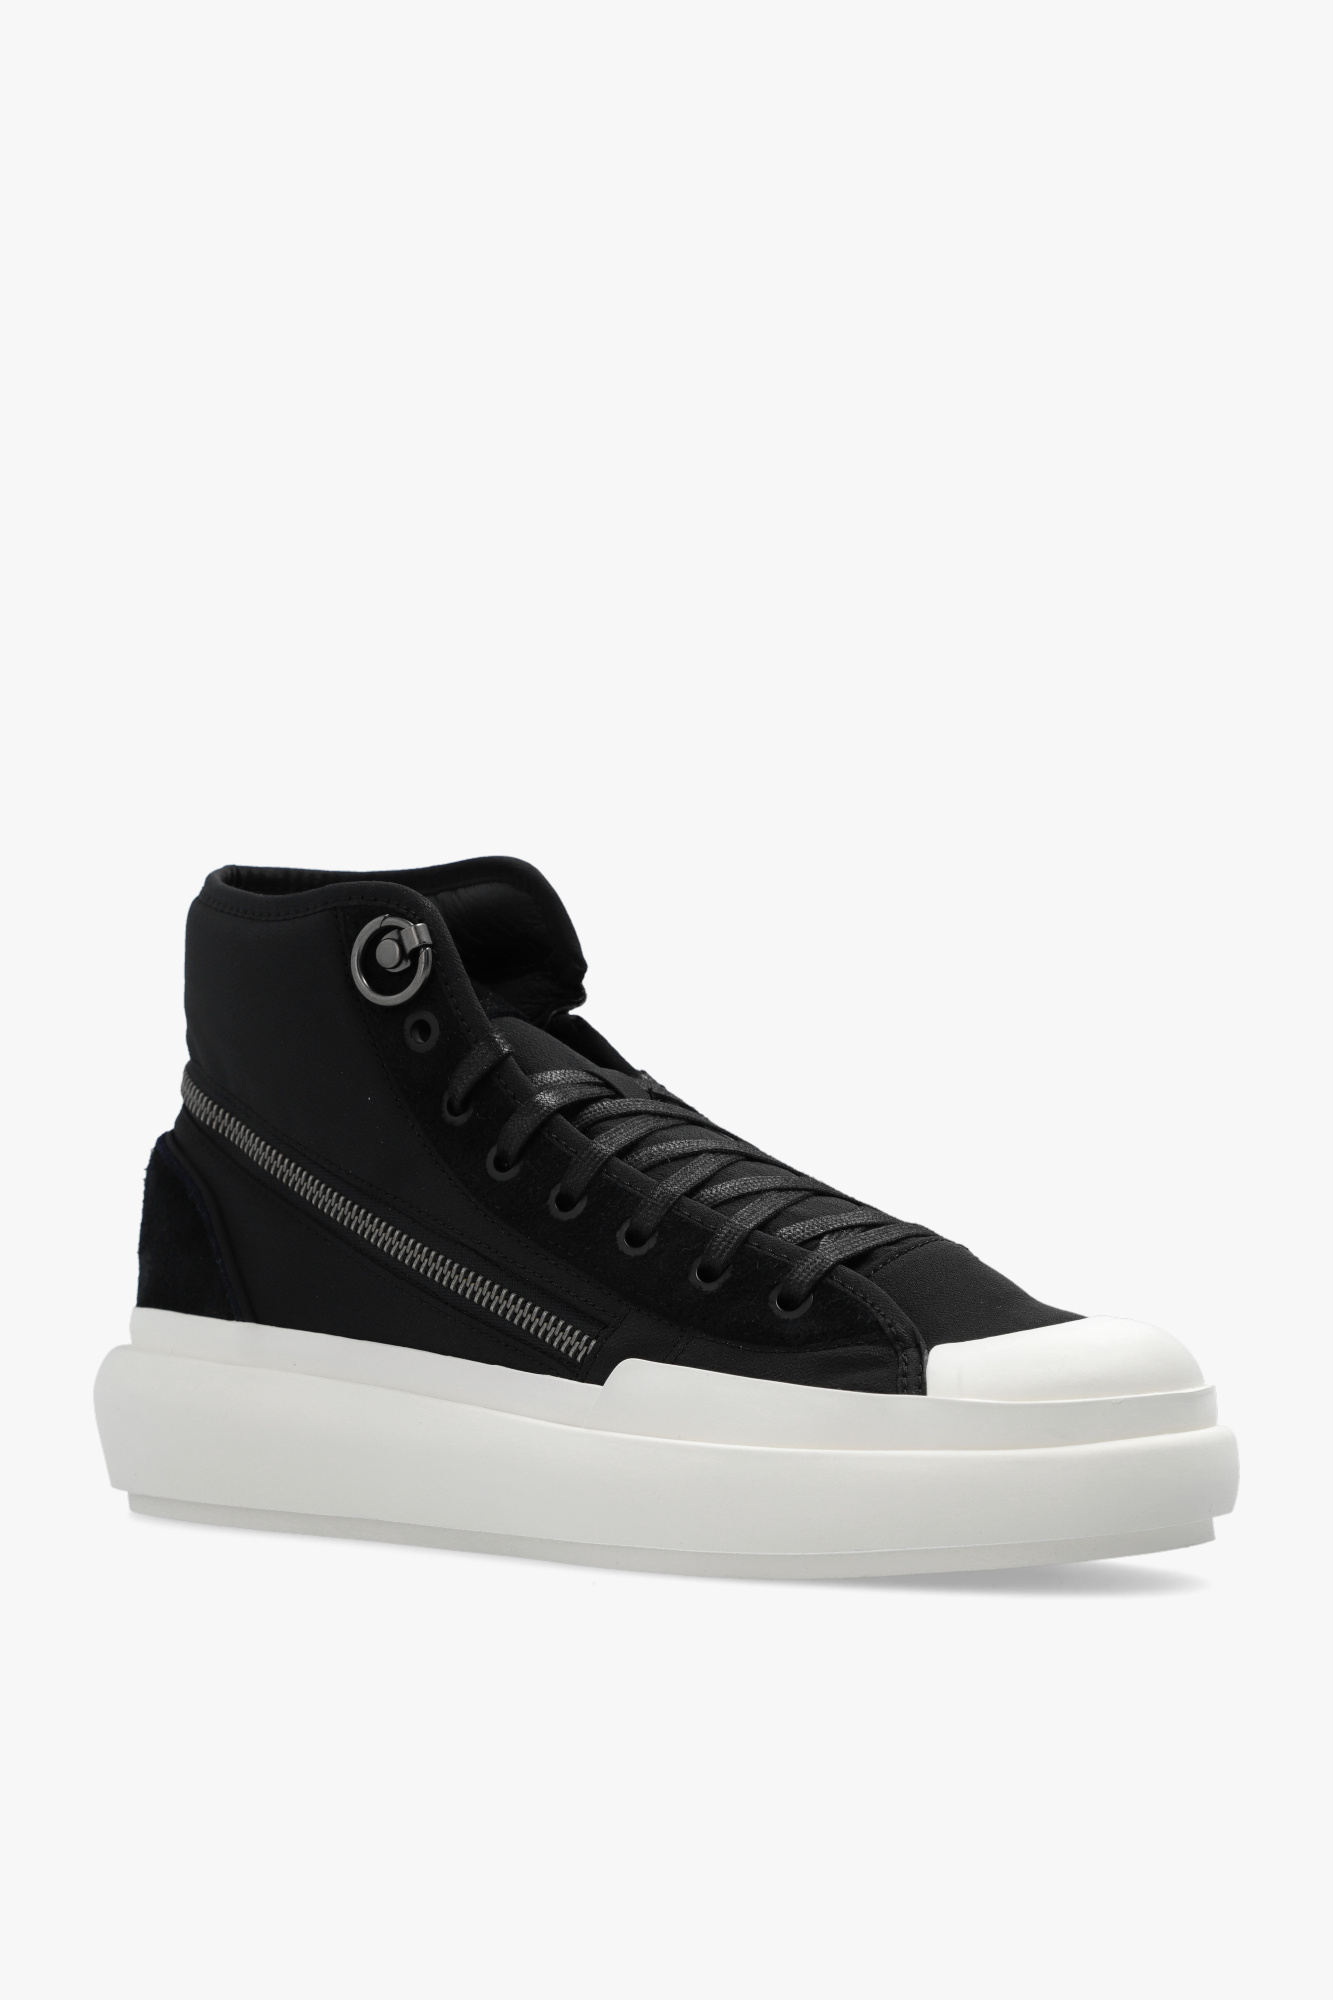 Buy at Shoe Palace ‘Ajatu Court High’ high-top sneakers